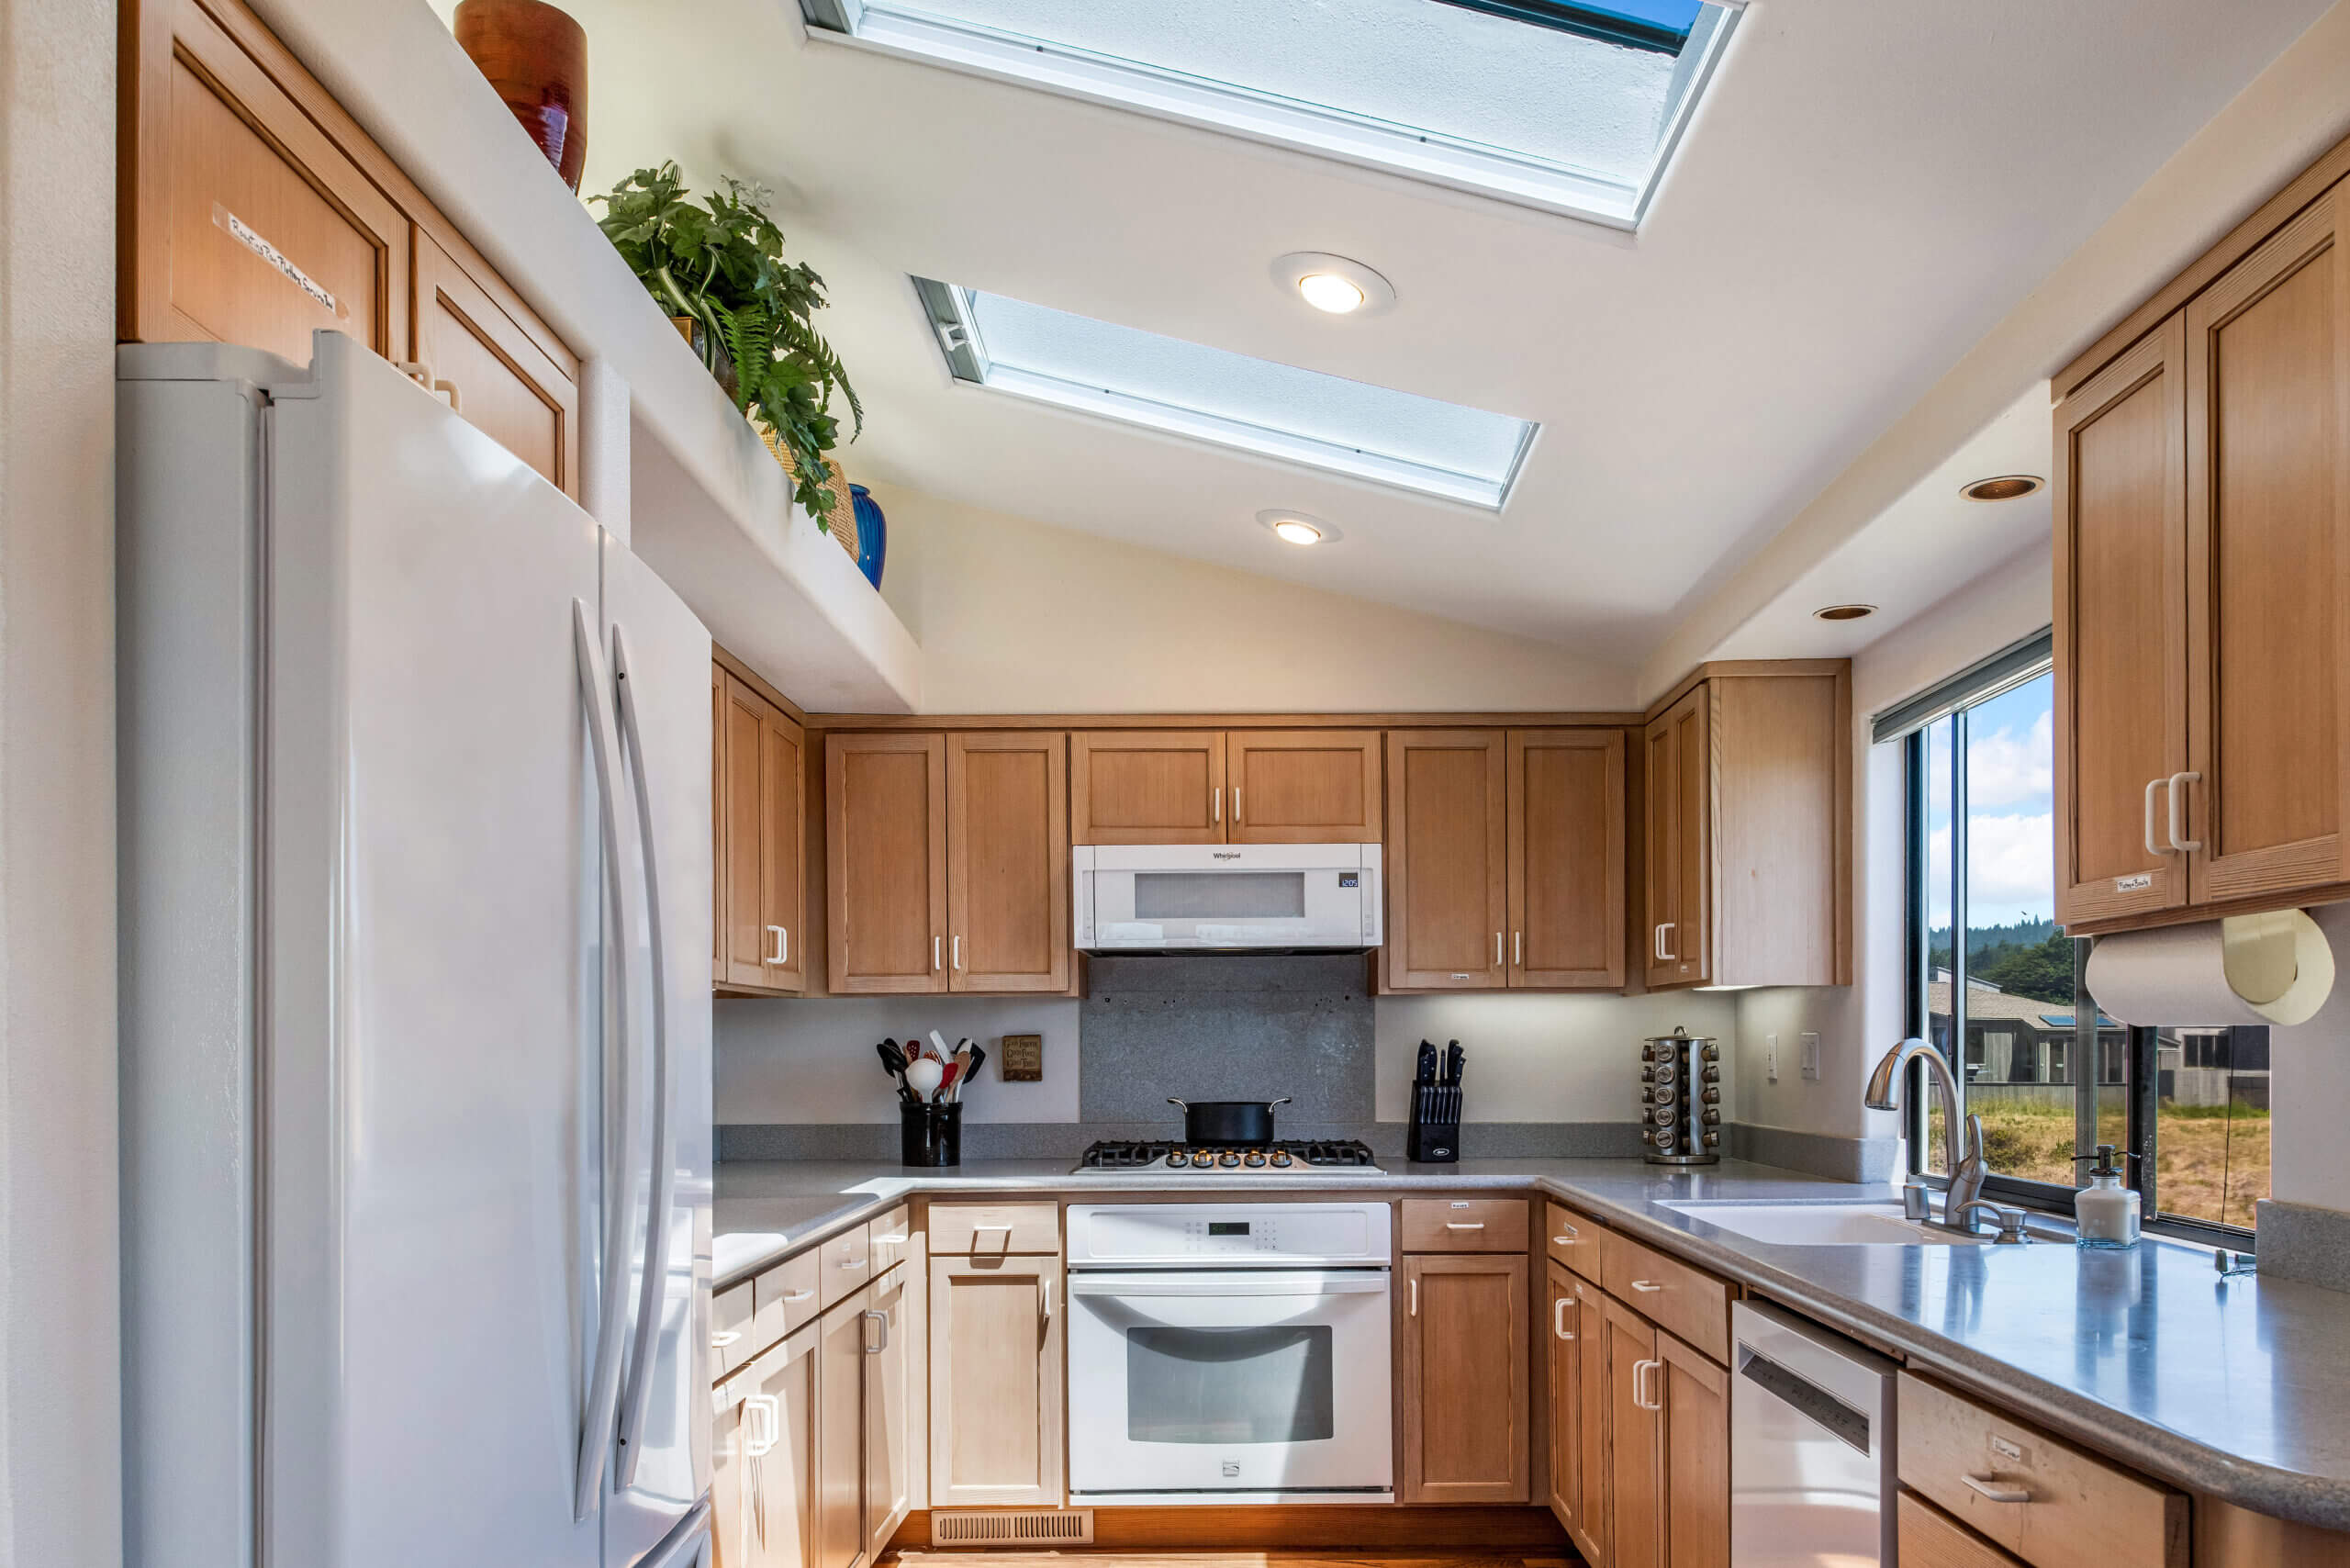 Piper's Dream bright kitchen with skylights